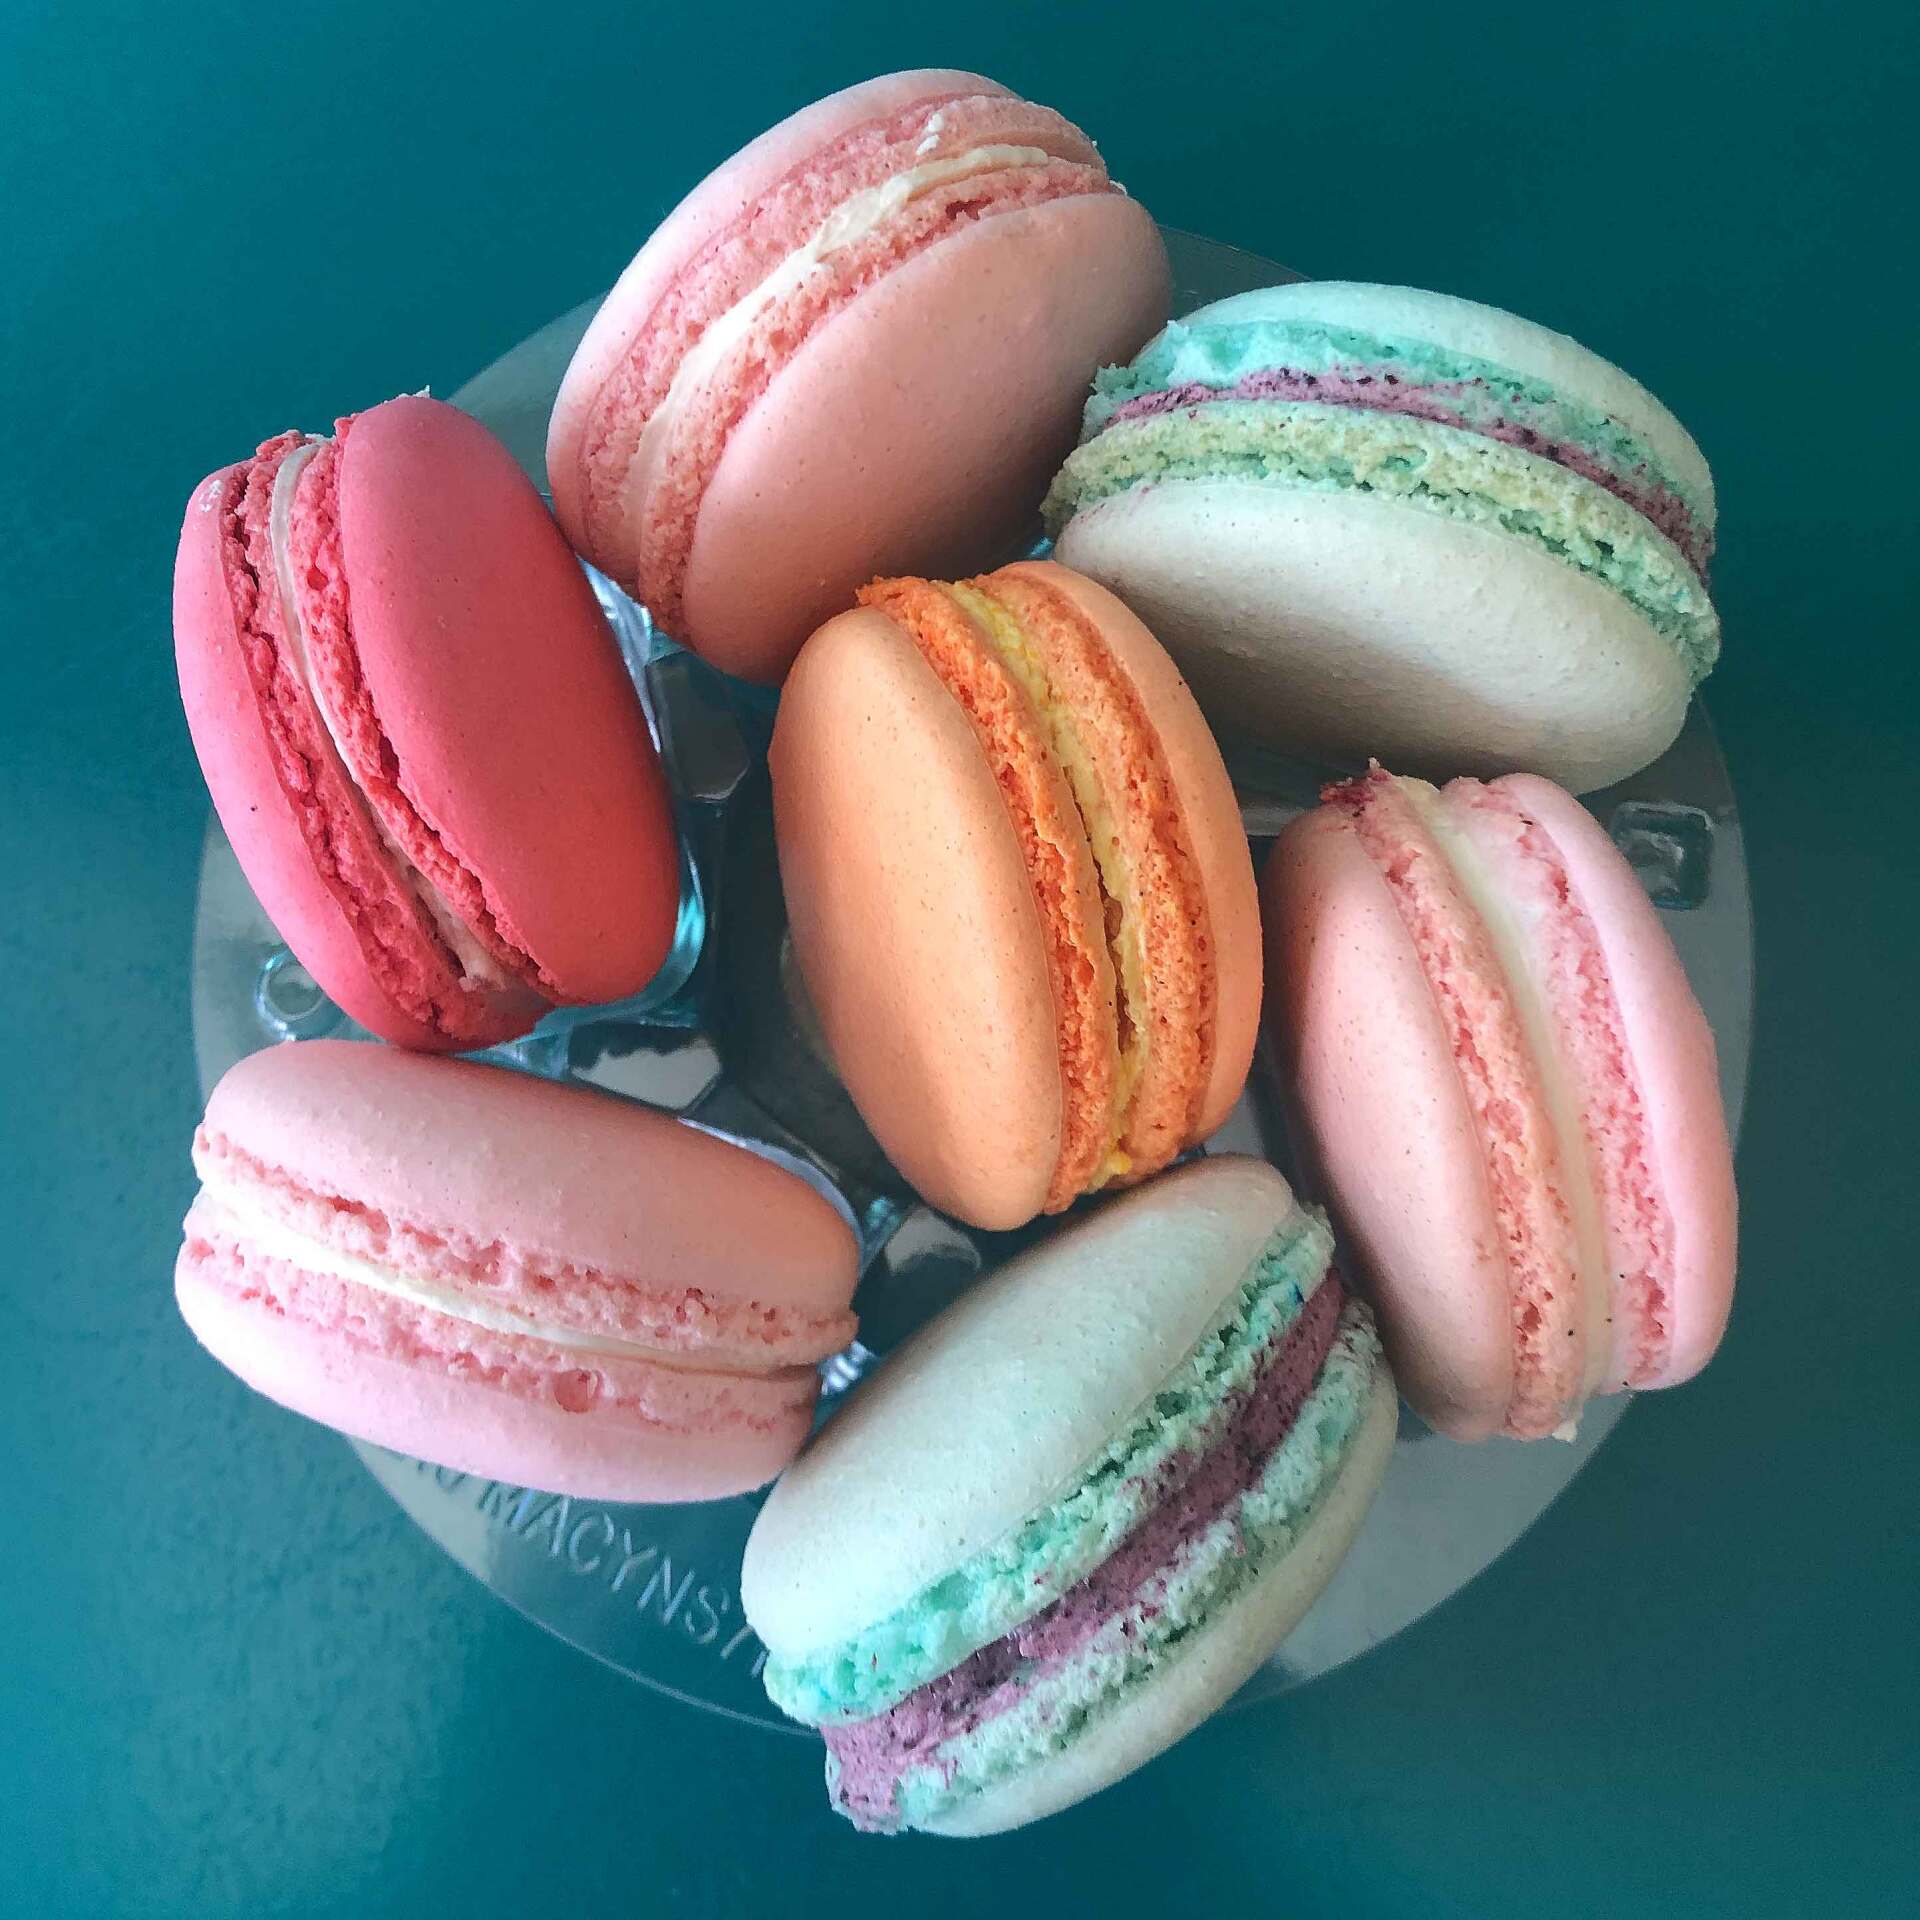 Where Can I Order Macaroons Online In The Uk